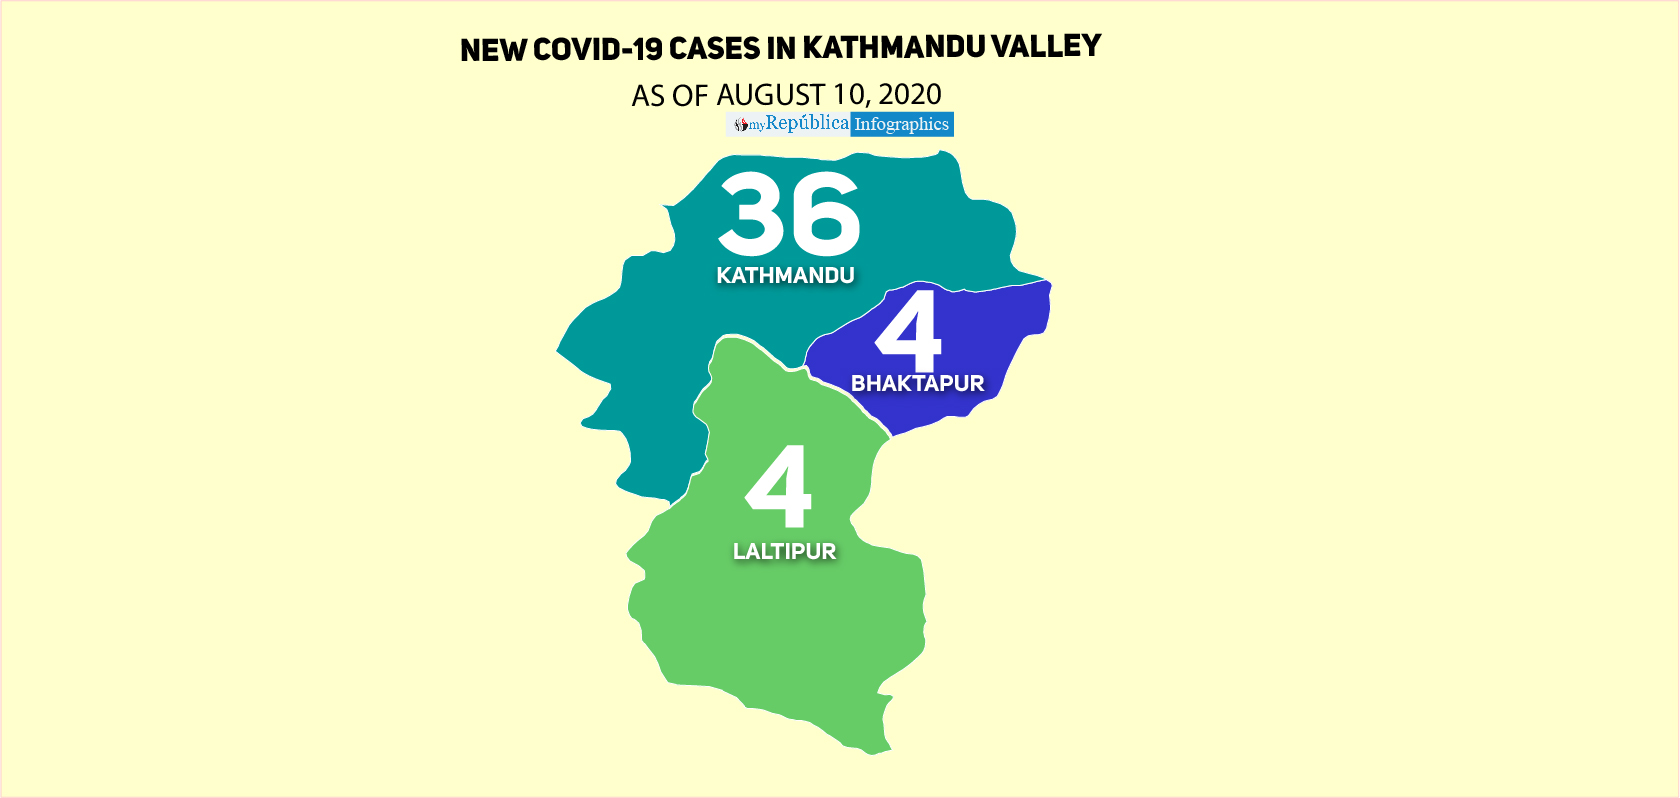 44 new COVID-19 cases in Kathmandu Valley